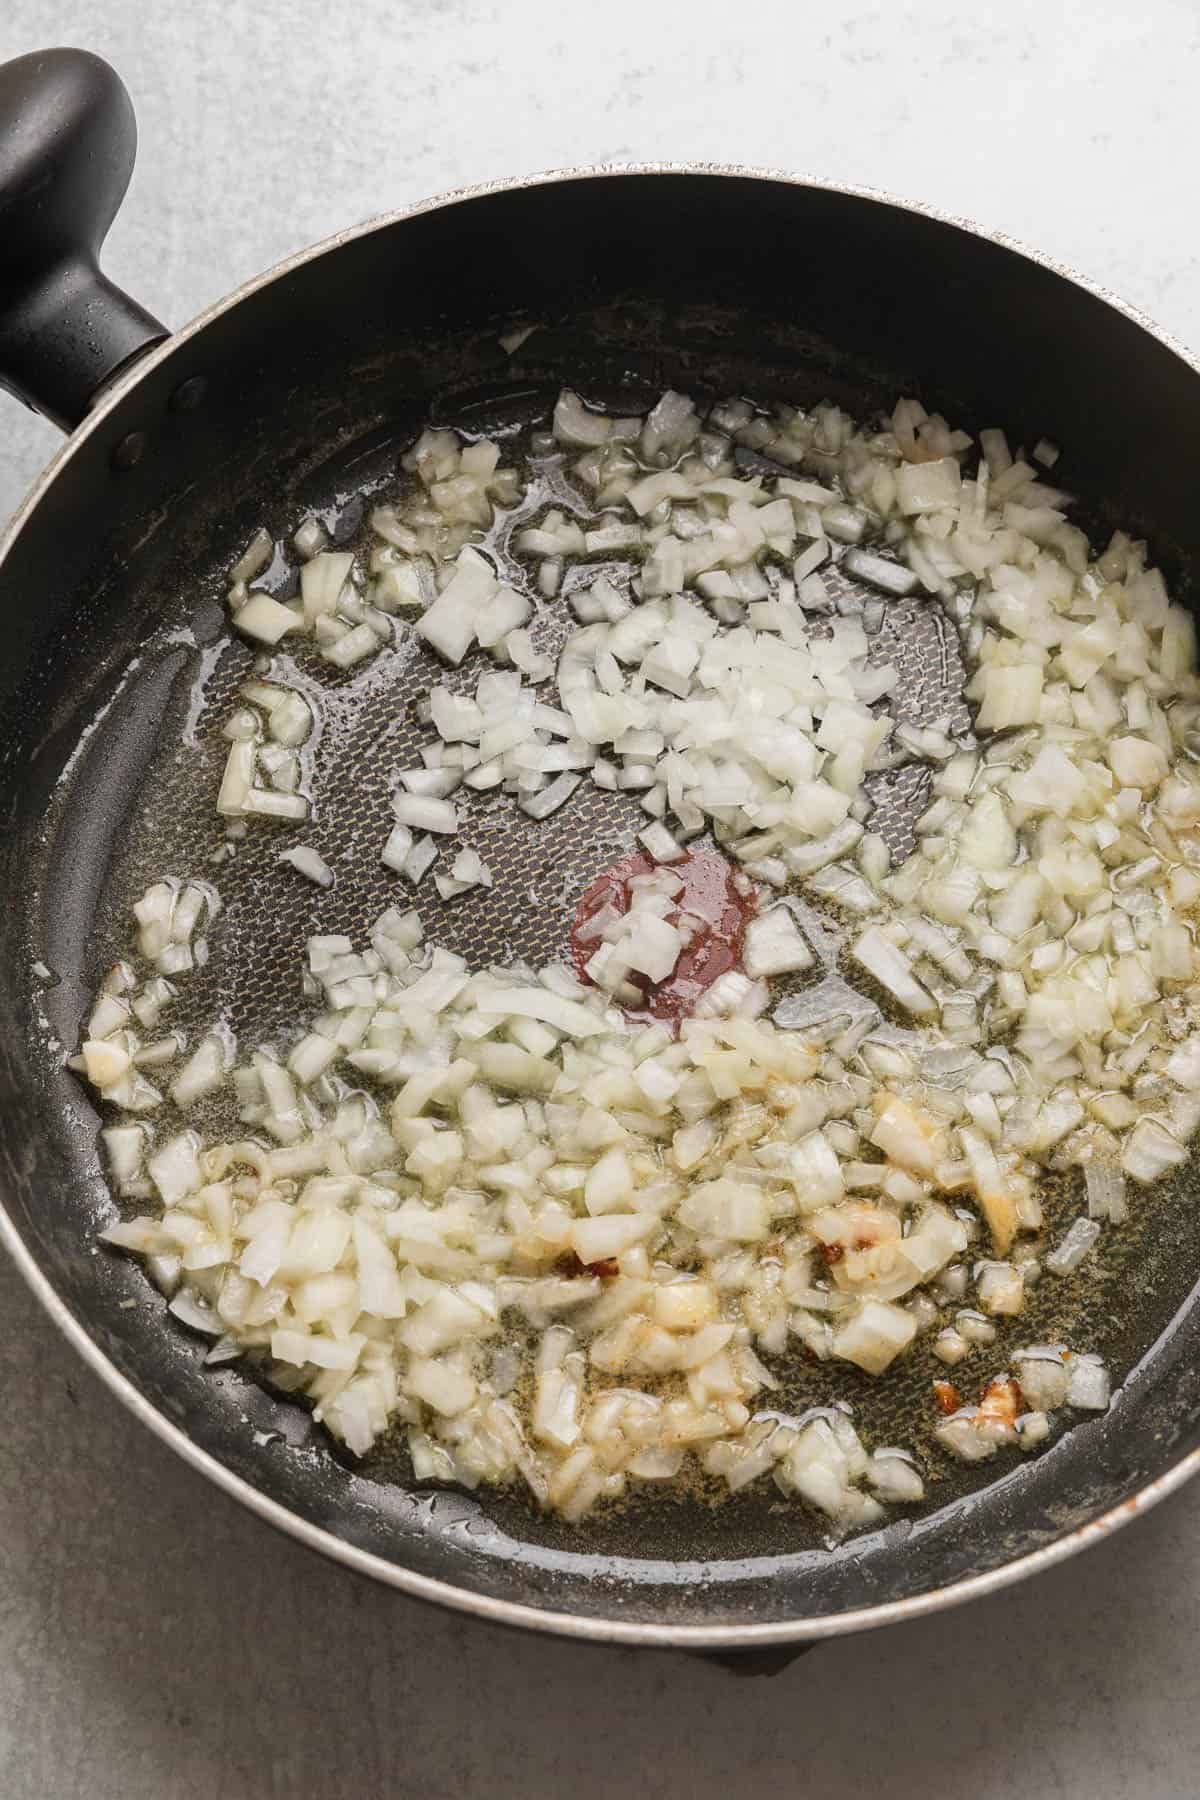 cooking the onions and garlic for the recipe